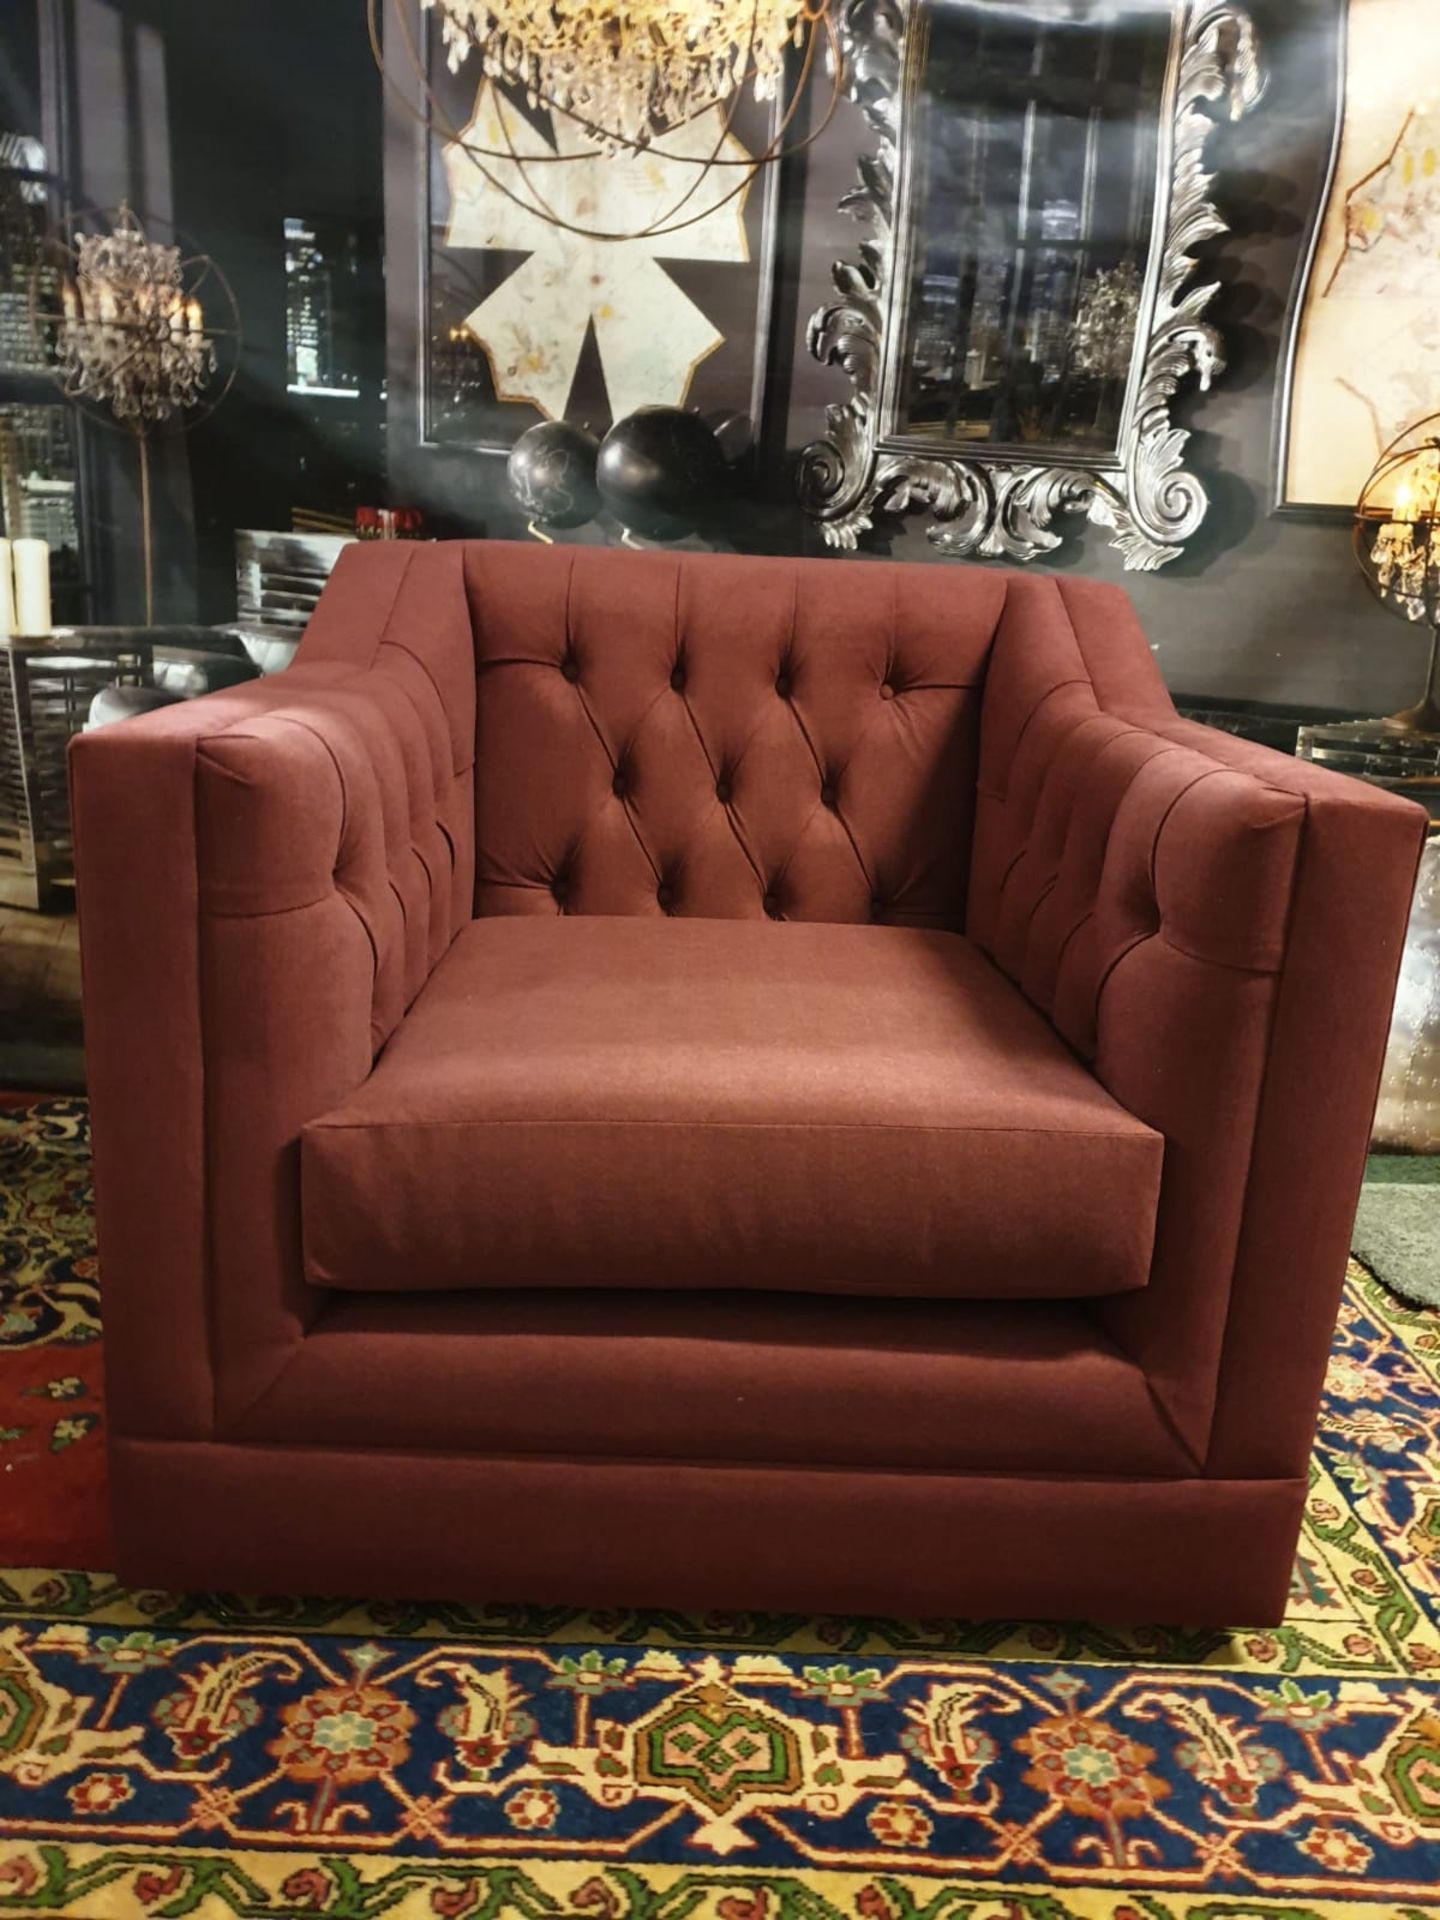 James Armchair Berwick Marsala Style thy name is James. This twist on a Chesterfield is a classic - Image 3 of 3